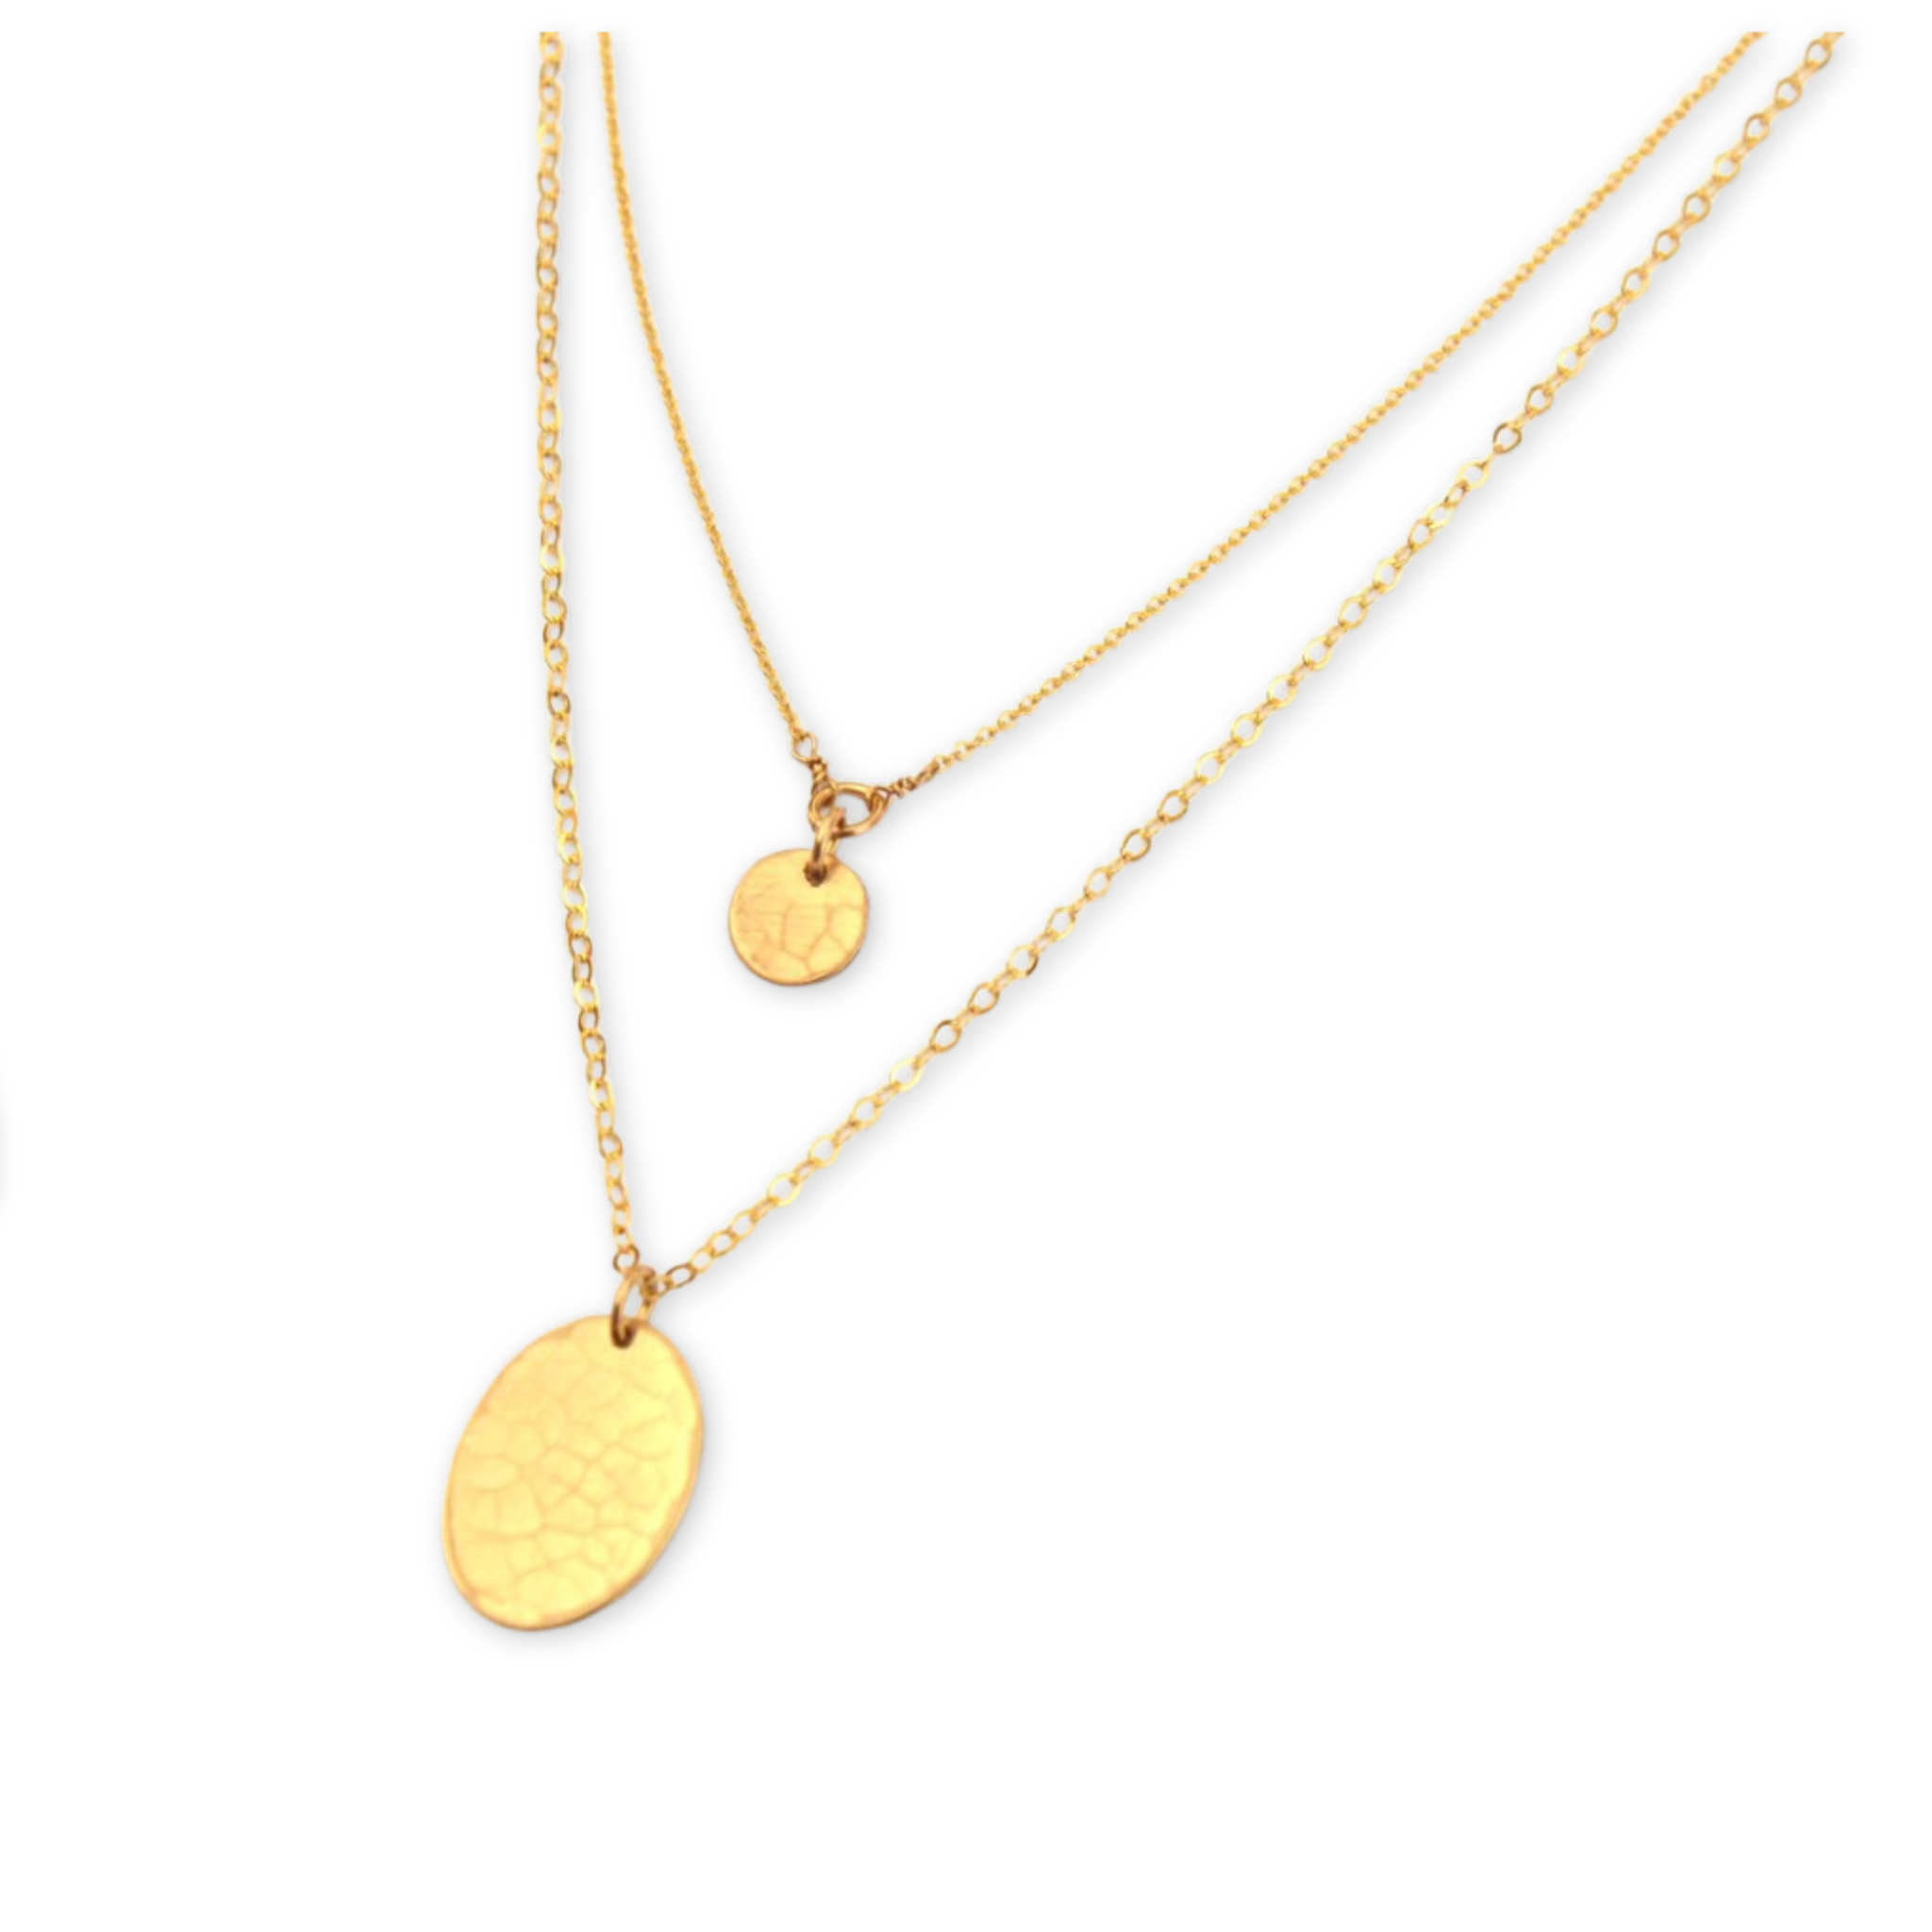 two layering necklaces featuring a textured round disc and a textured oval both hanging on simple chains 